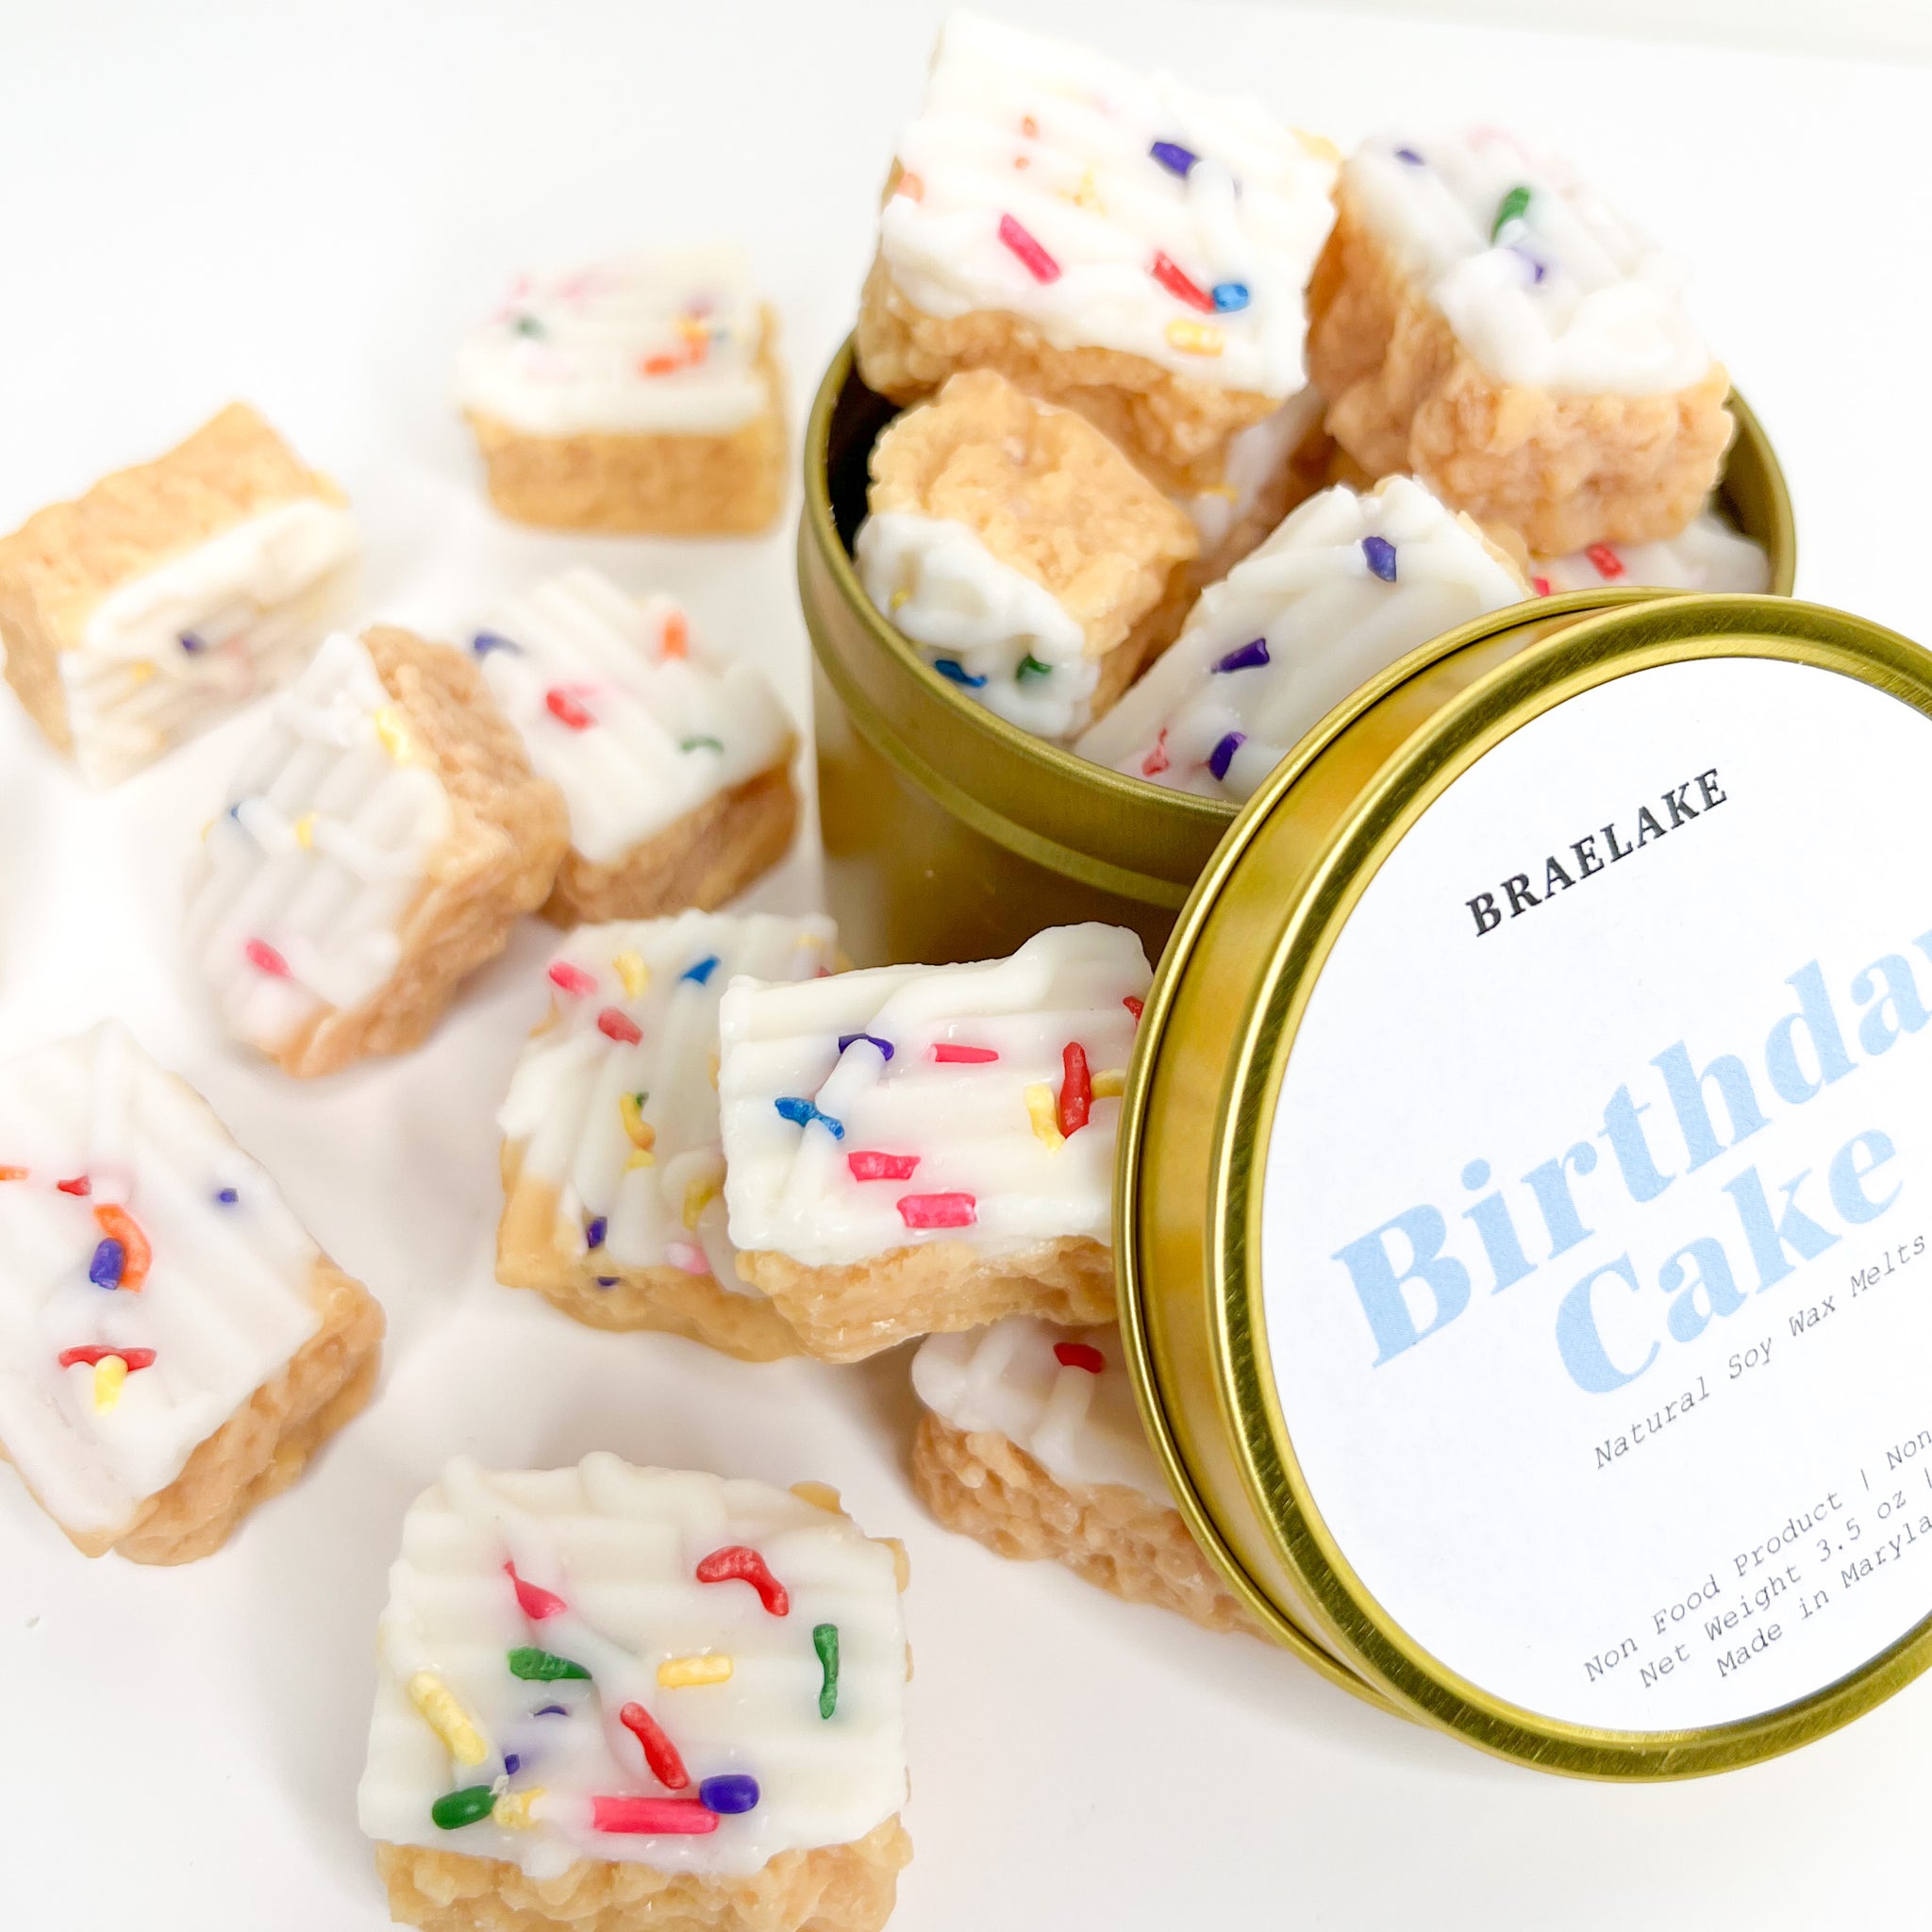 Yui Brooklyn Cake Candle | Urban Outfitters